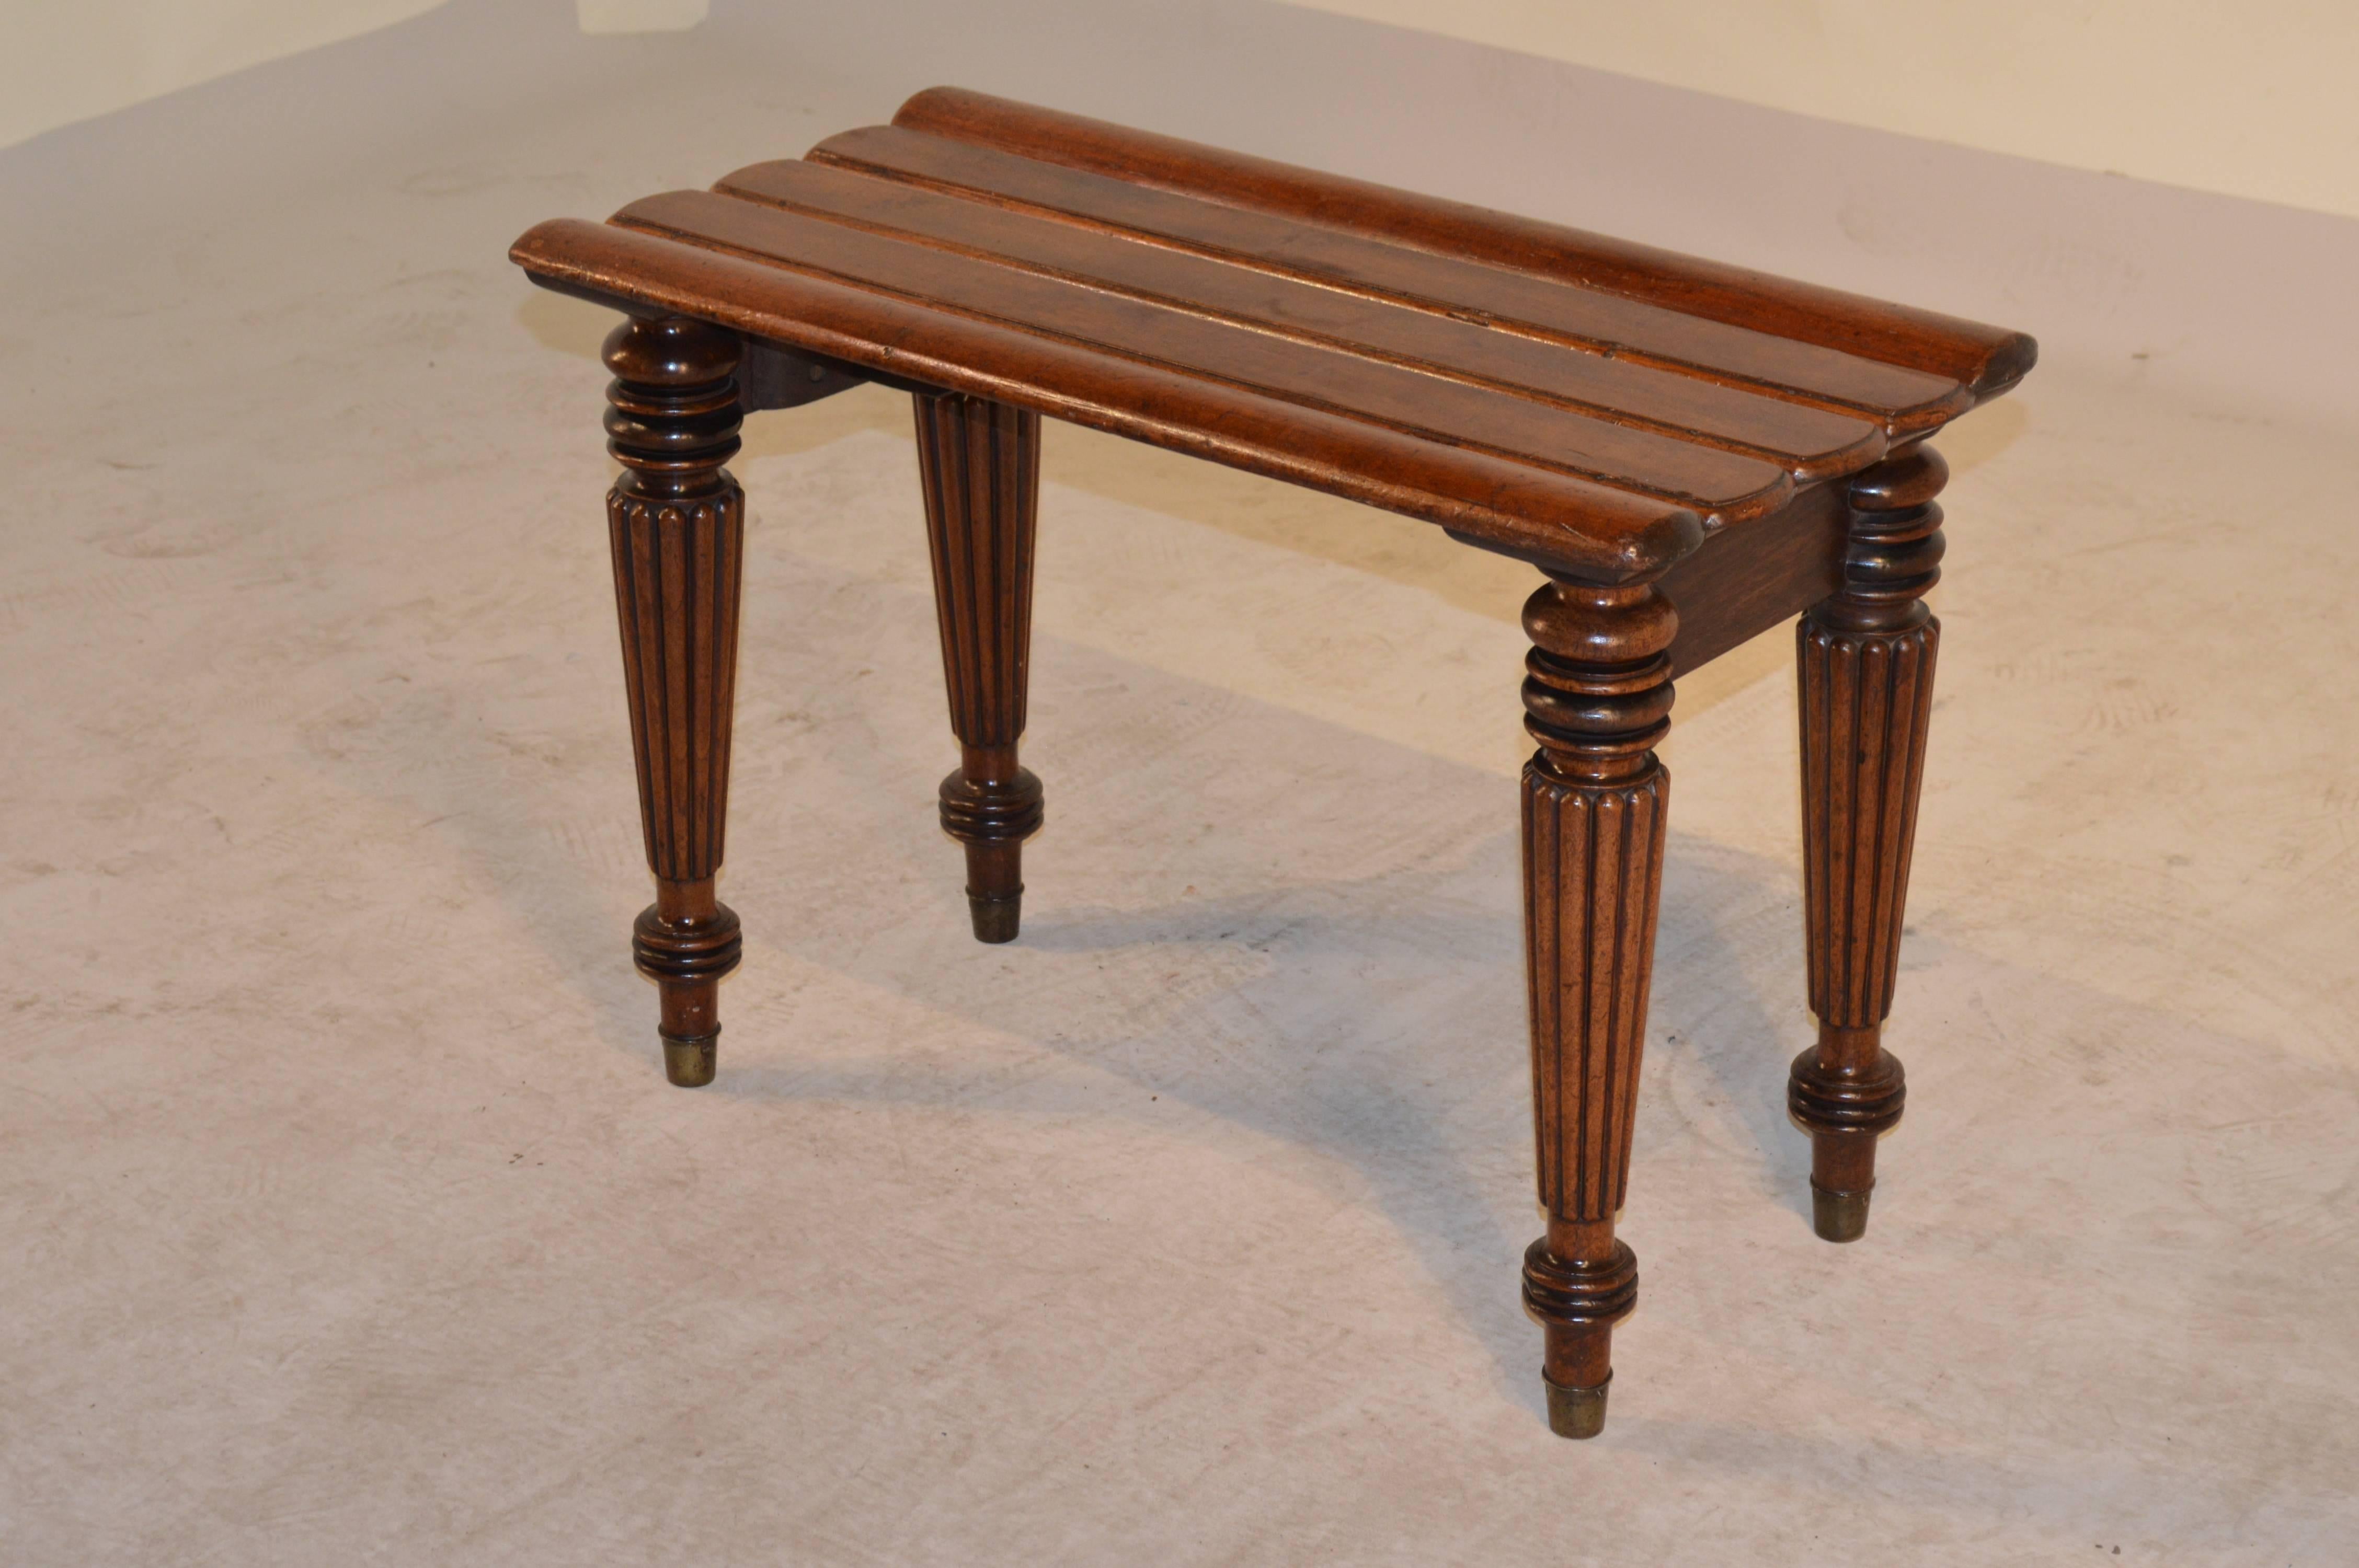 19th Century English mahogany luggage stand with shaped slats on top and a simple apron following down to wonderfully reeded and turned legs and tapered feet with original brass caps.